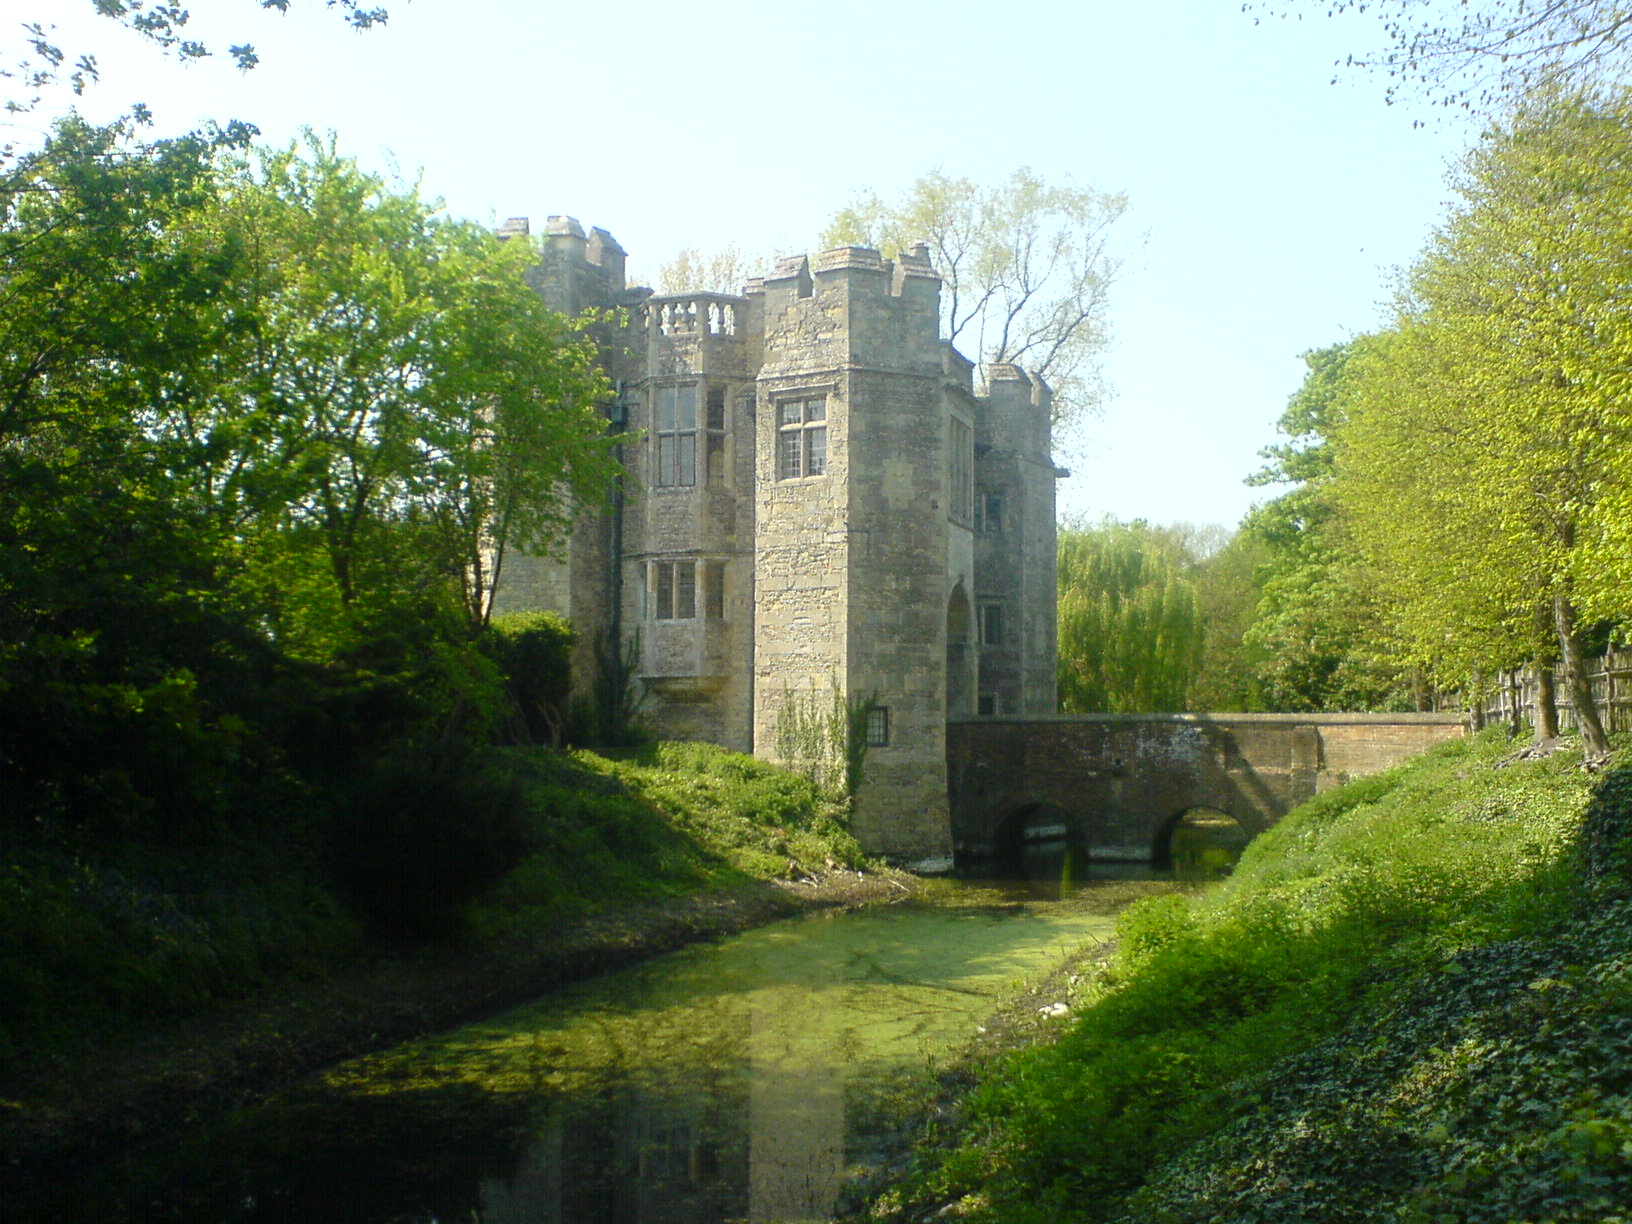 a castle perched on top of a grassy hill next to a river